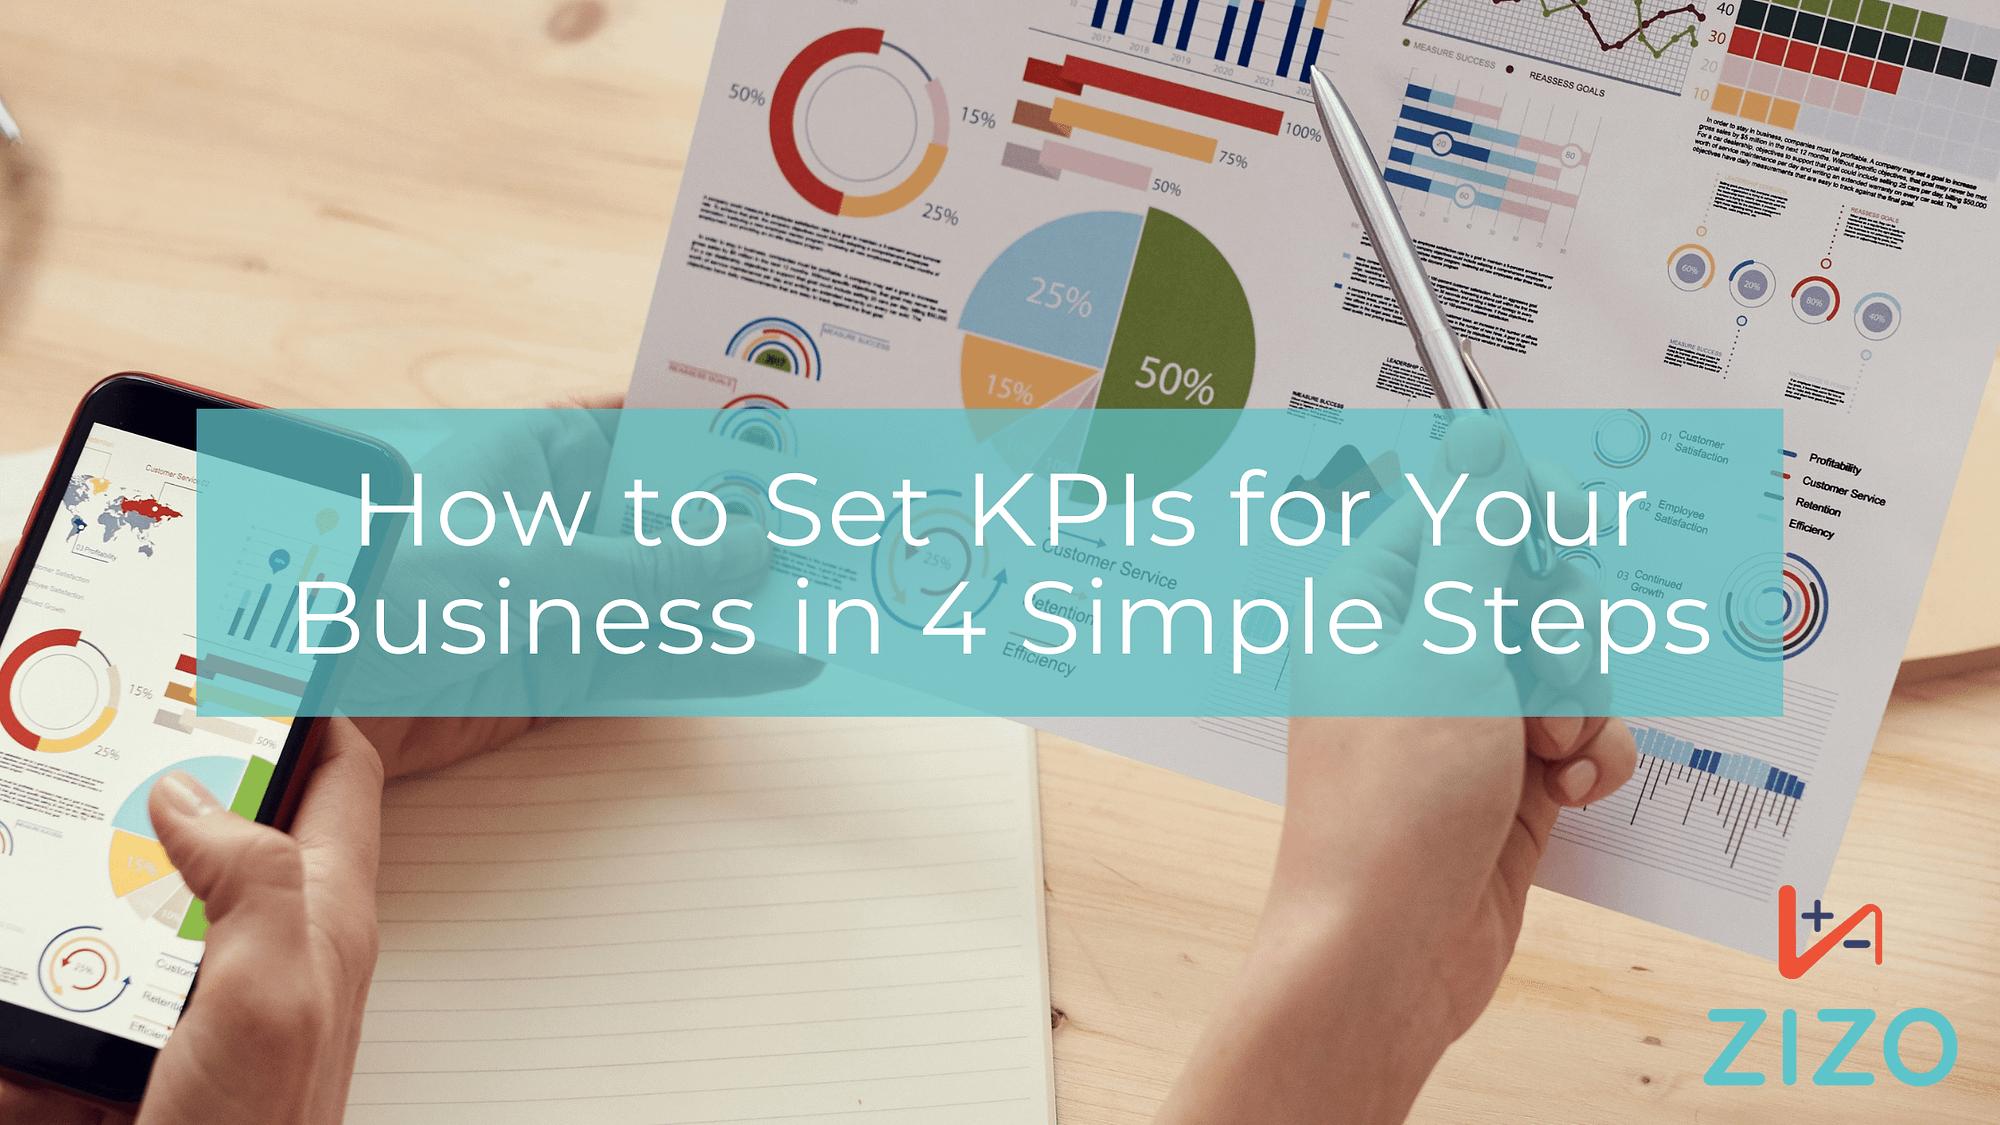 How to Set KPIs for Your Business in 4 simple steps